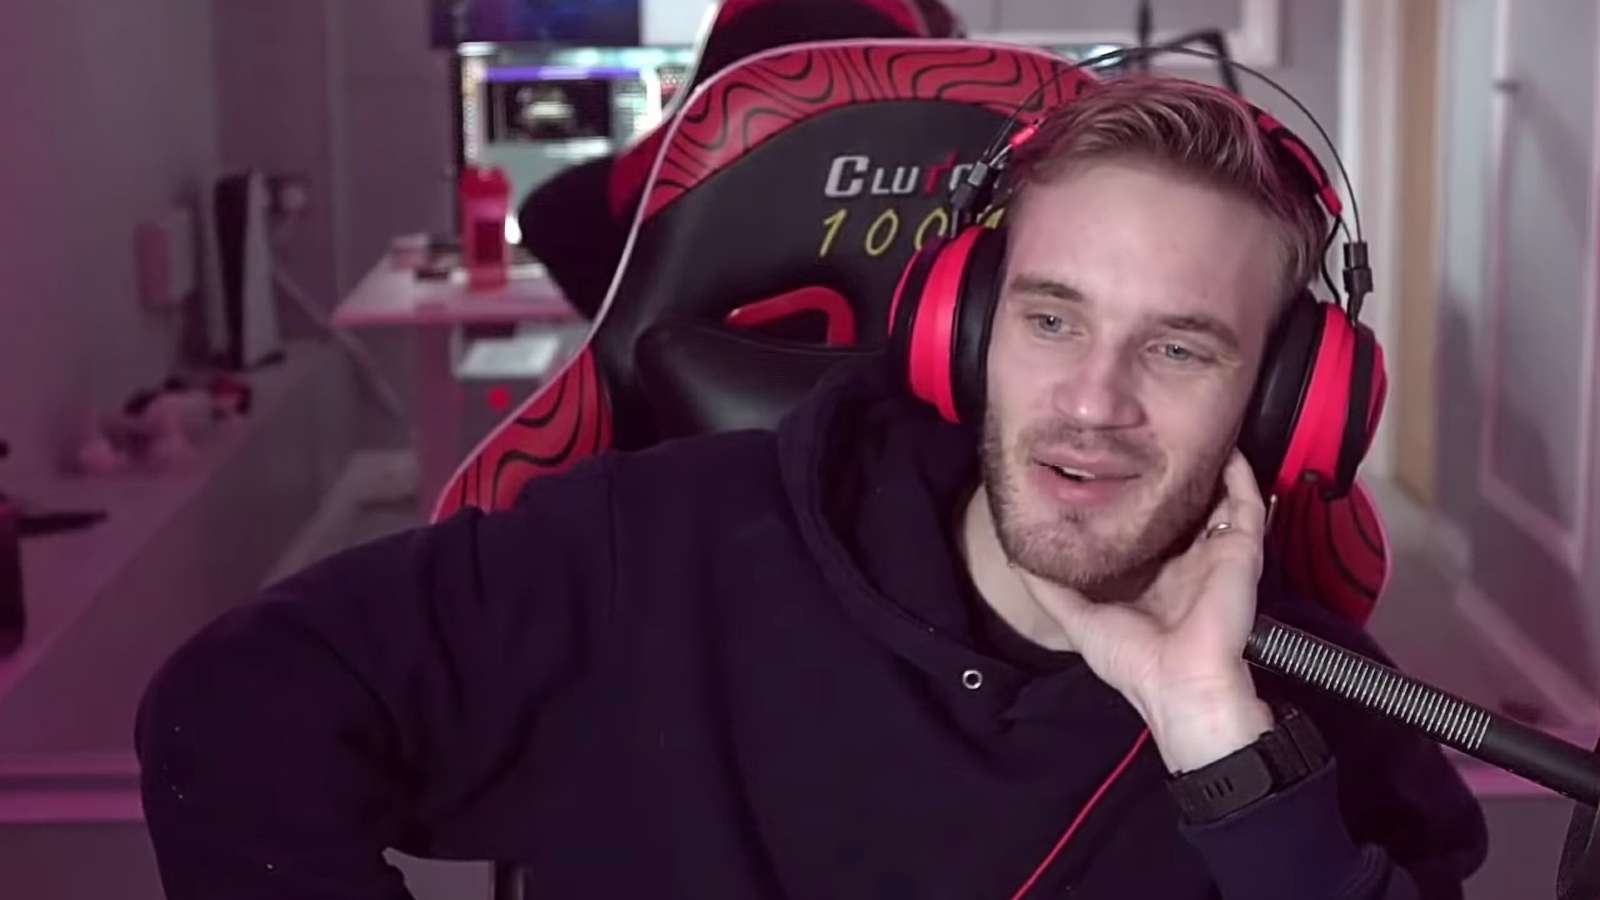 PewDiePie streaming on YouTube